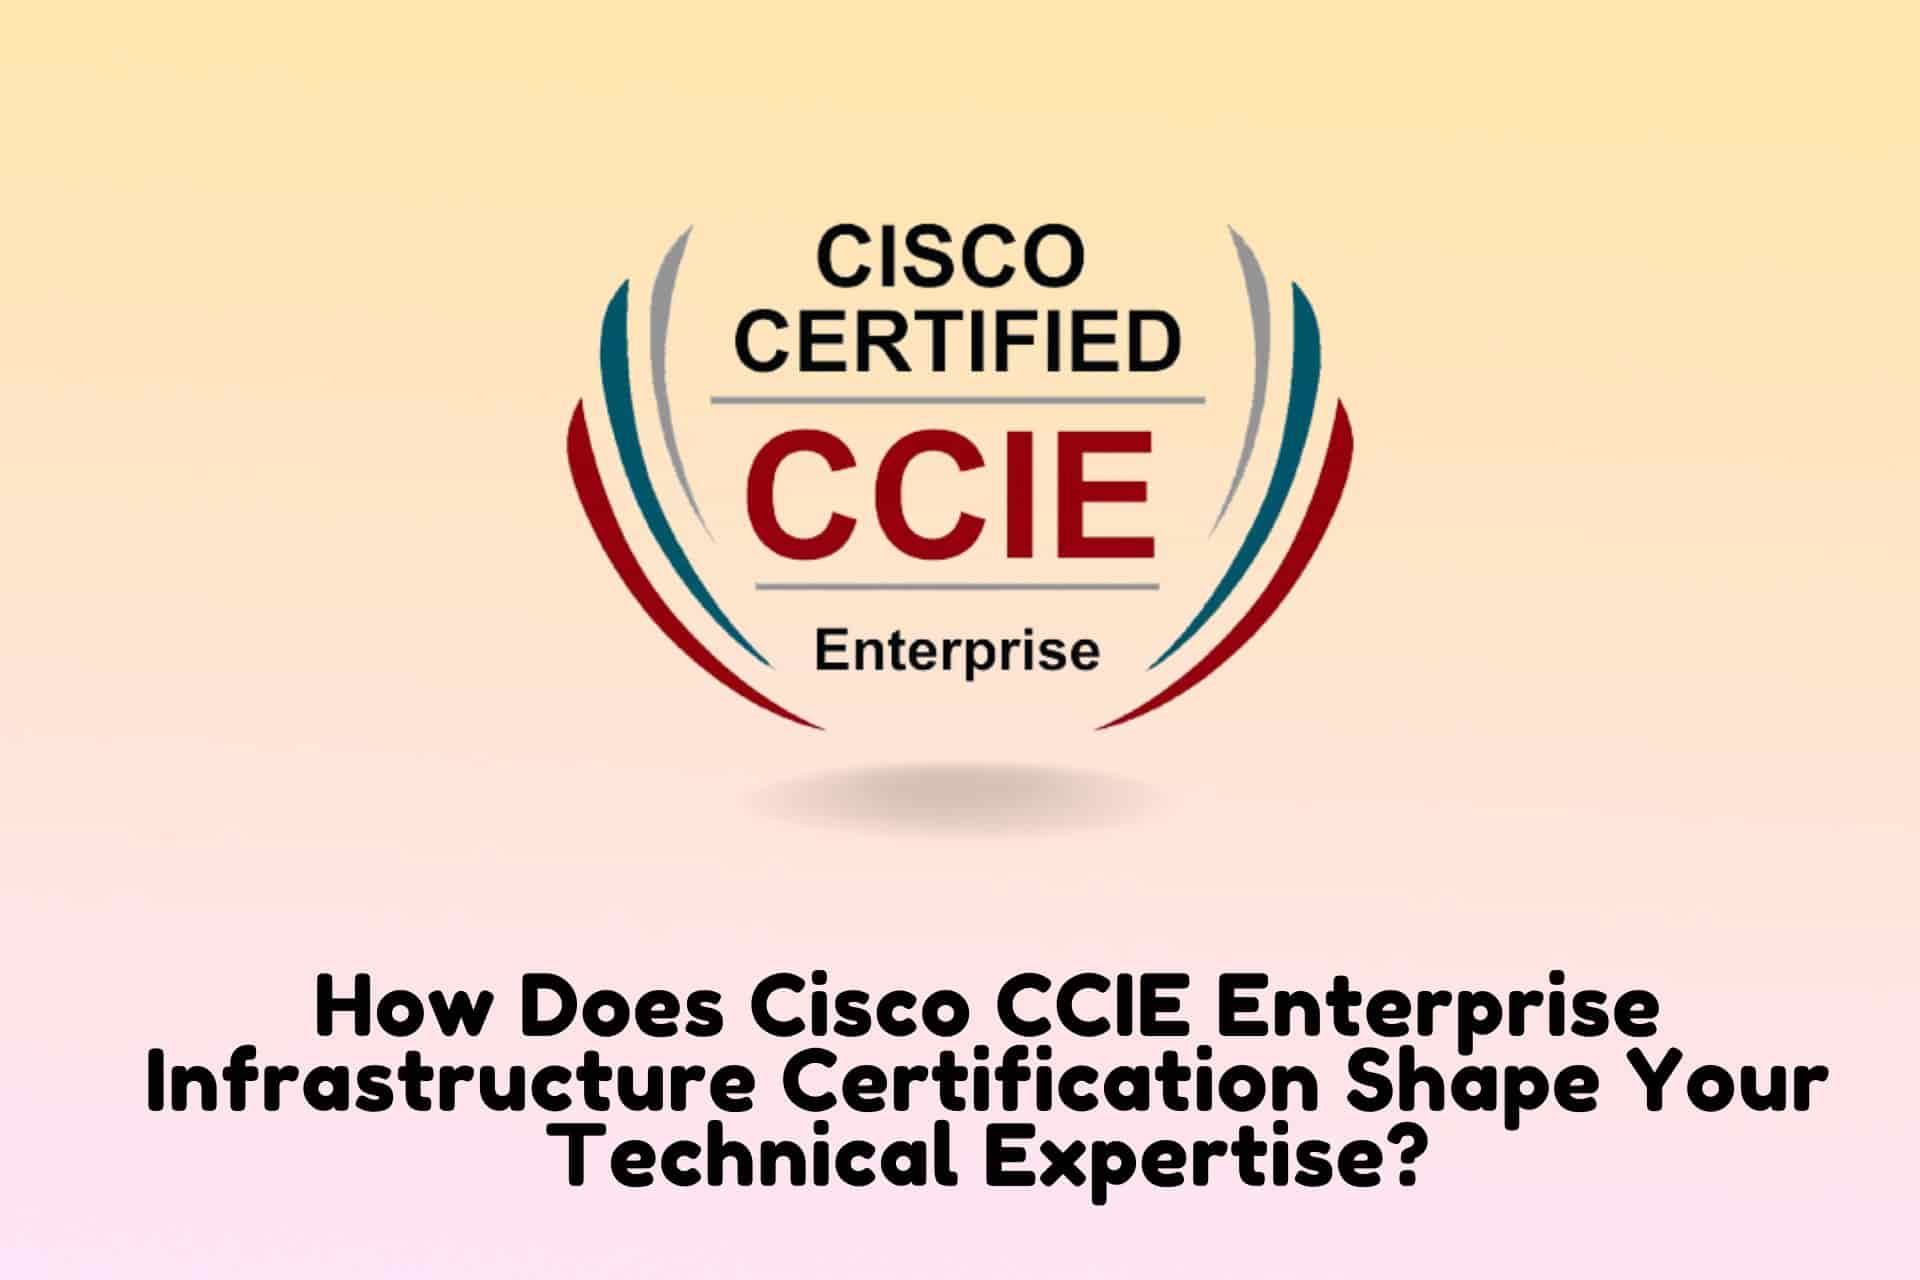 How Does Cisco CCIE Enterprise Infrastructure Certification Shape Your Technical Expertise